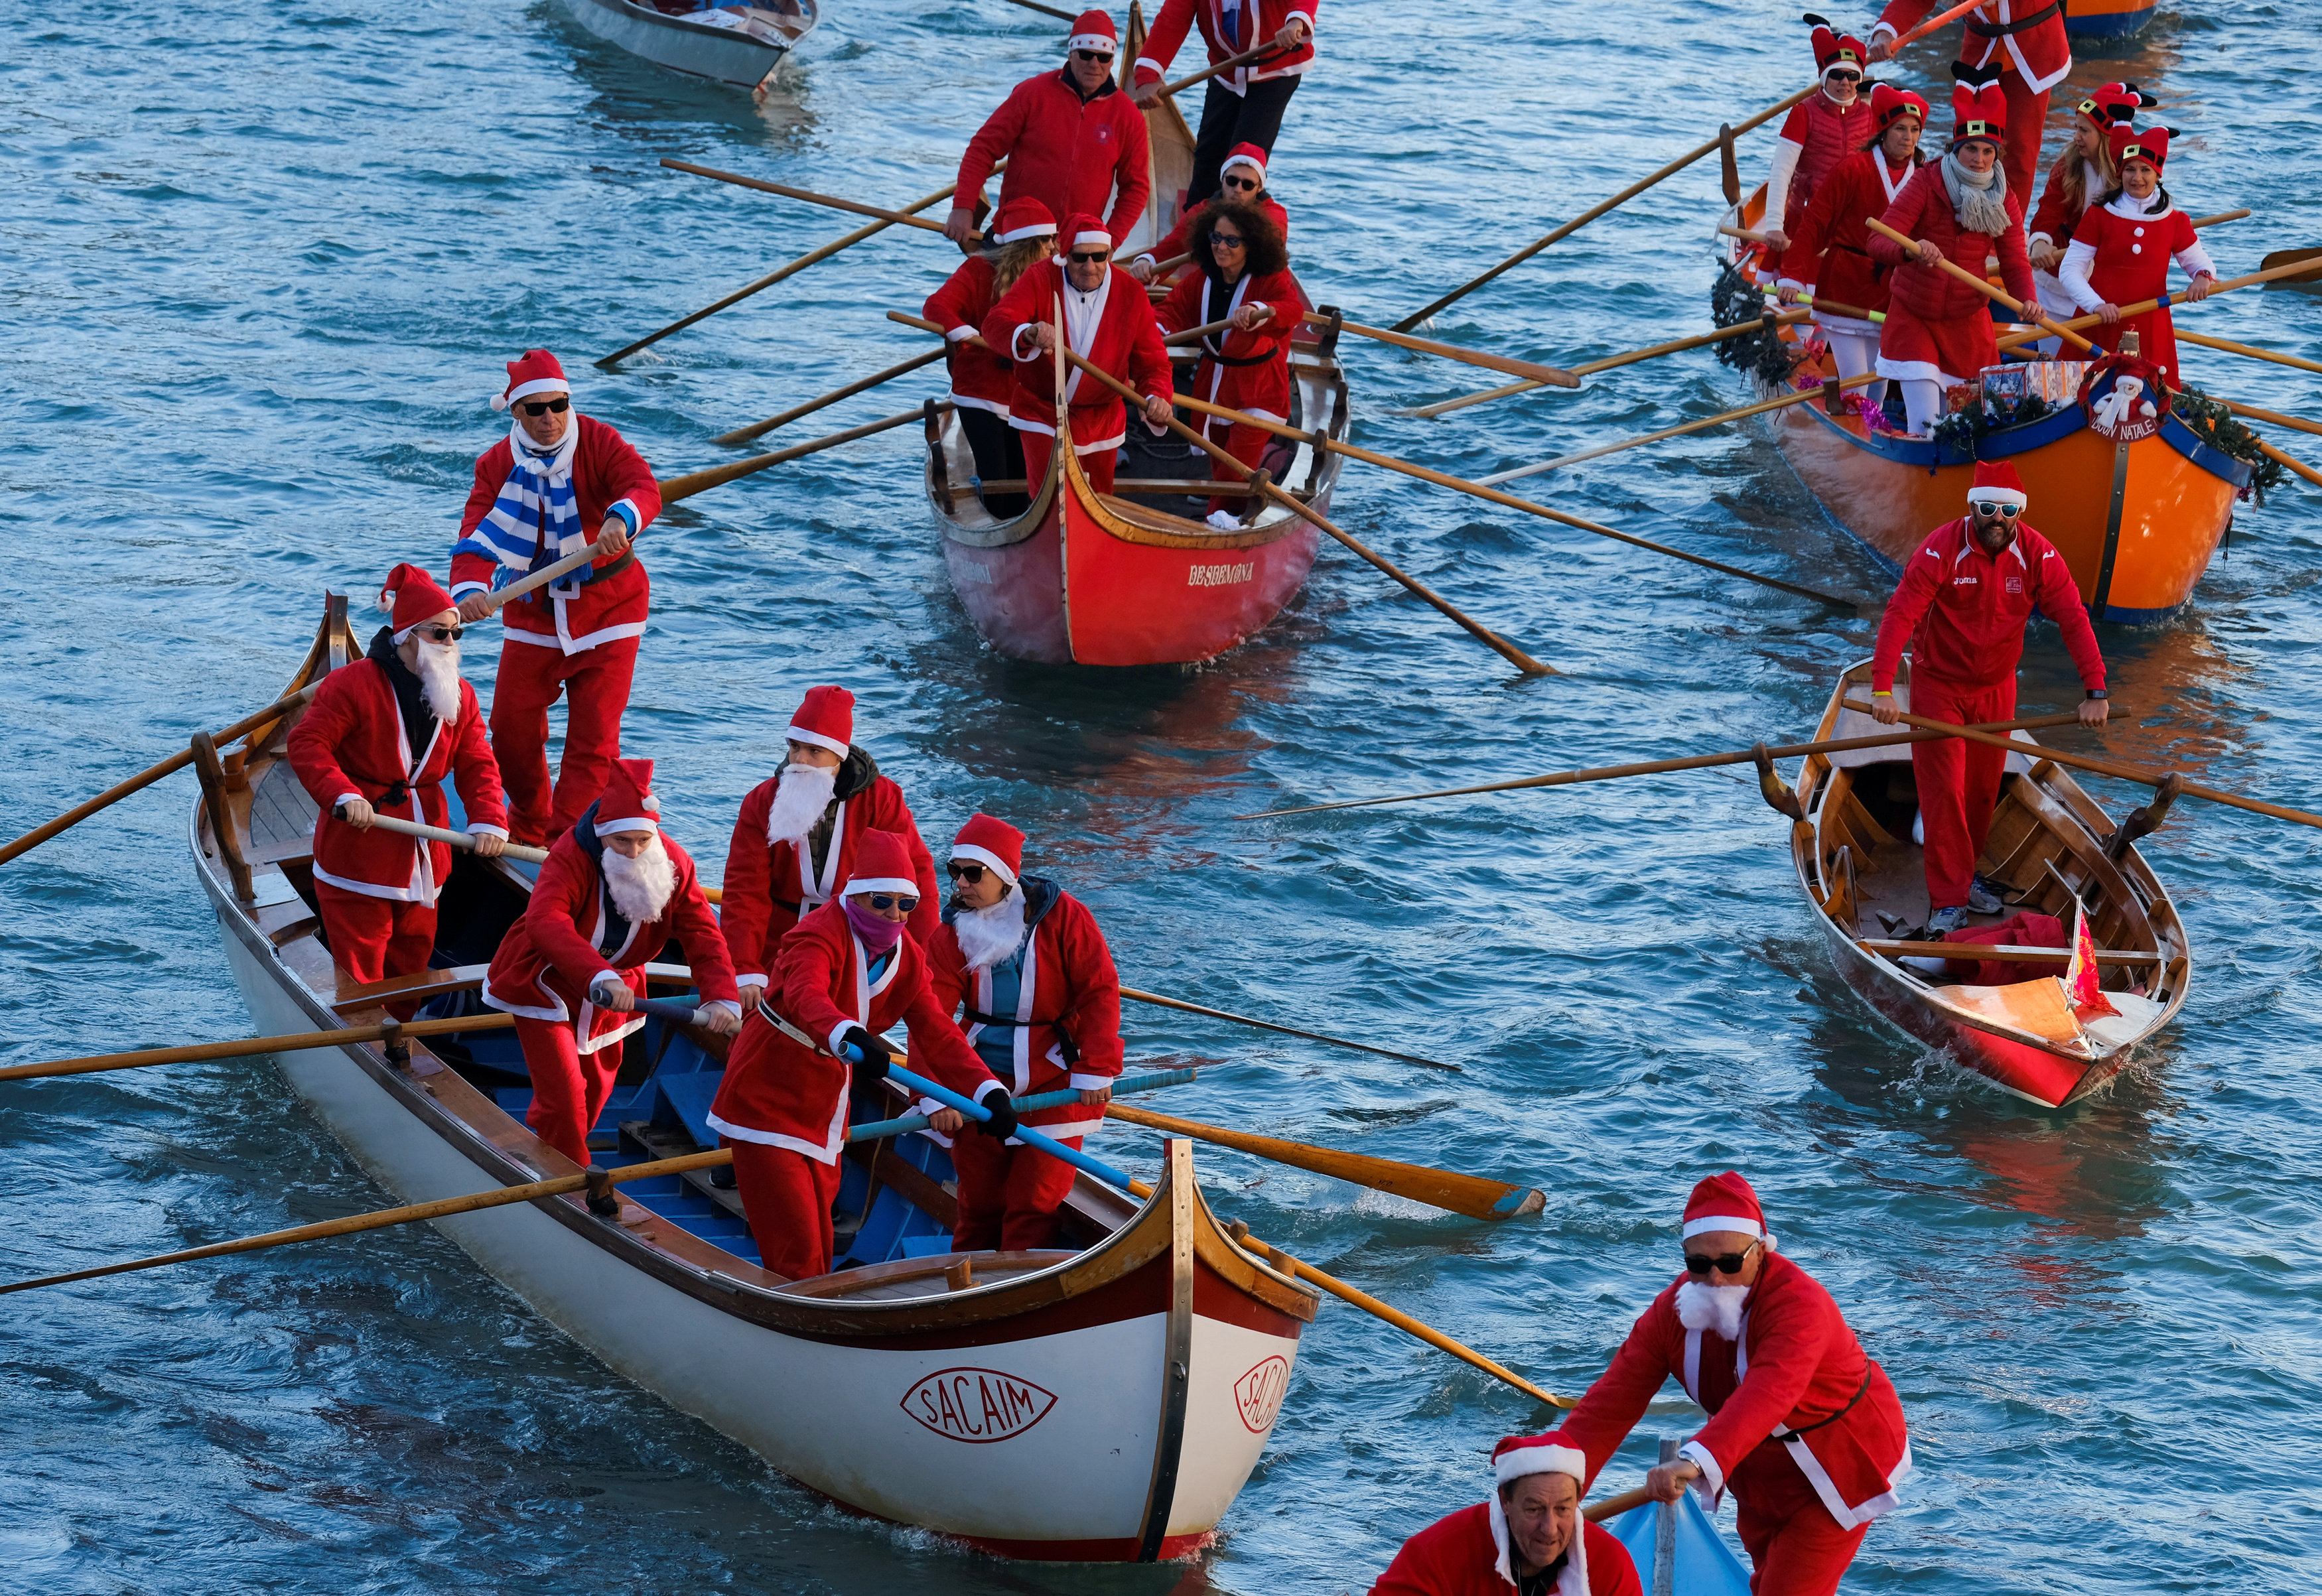 In pictures: Santas on boats in Venice